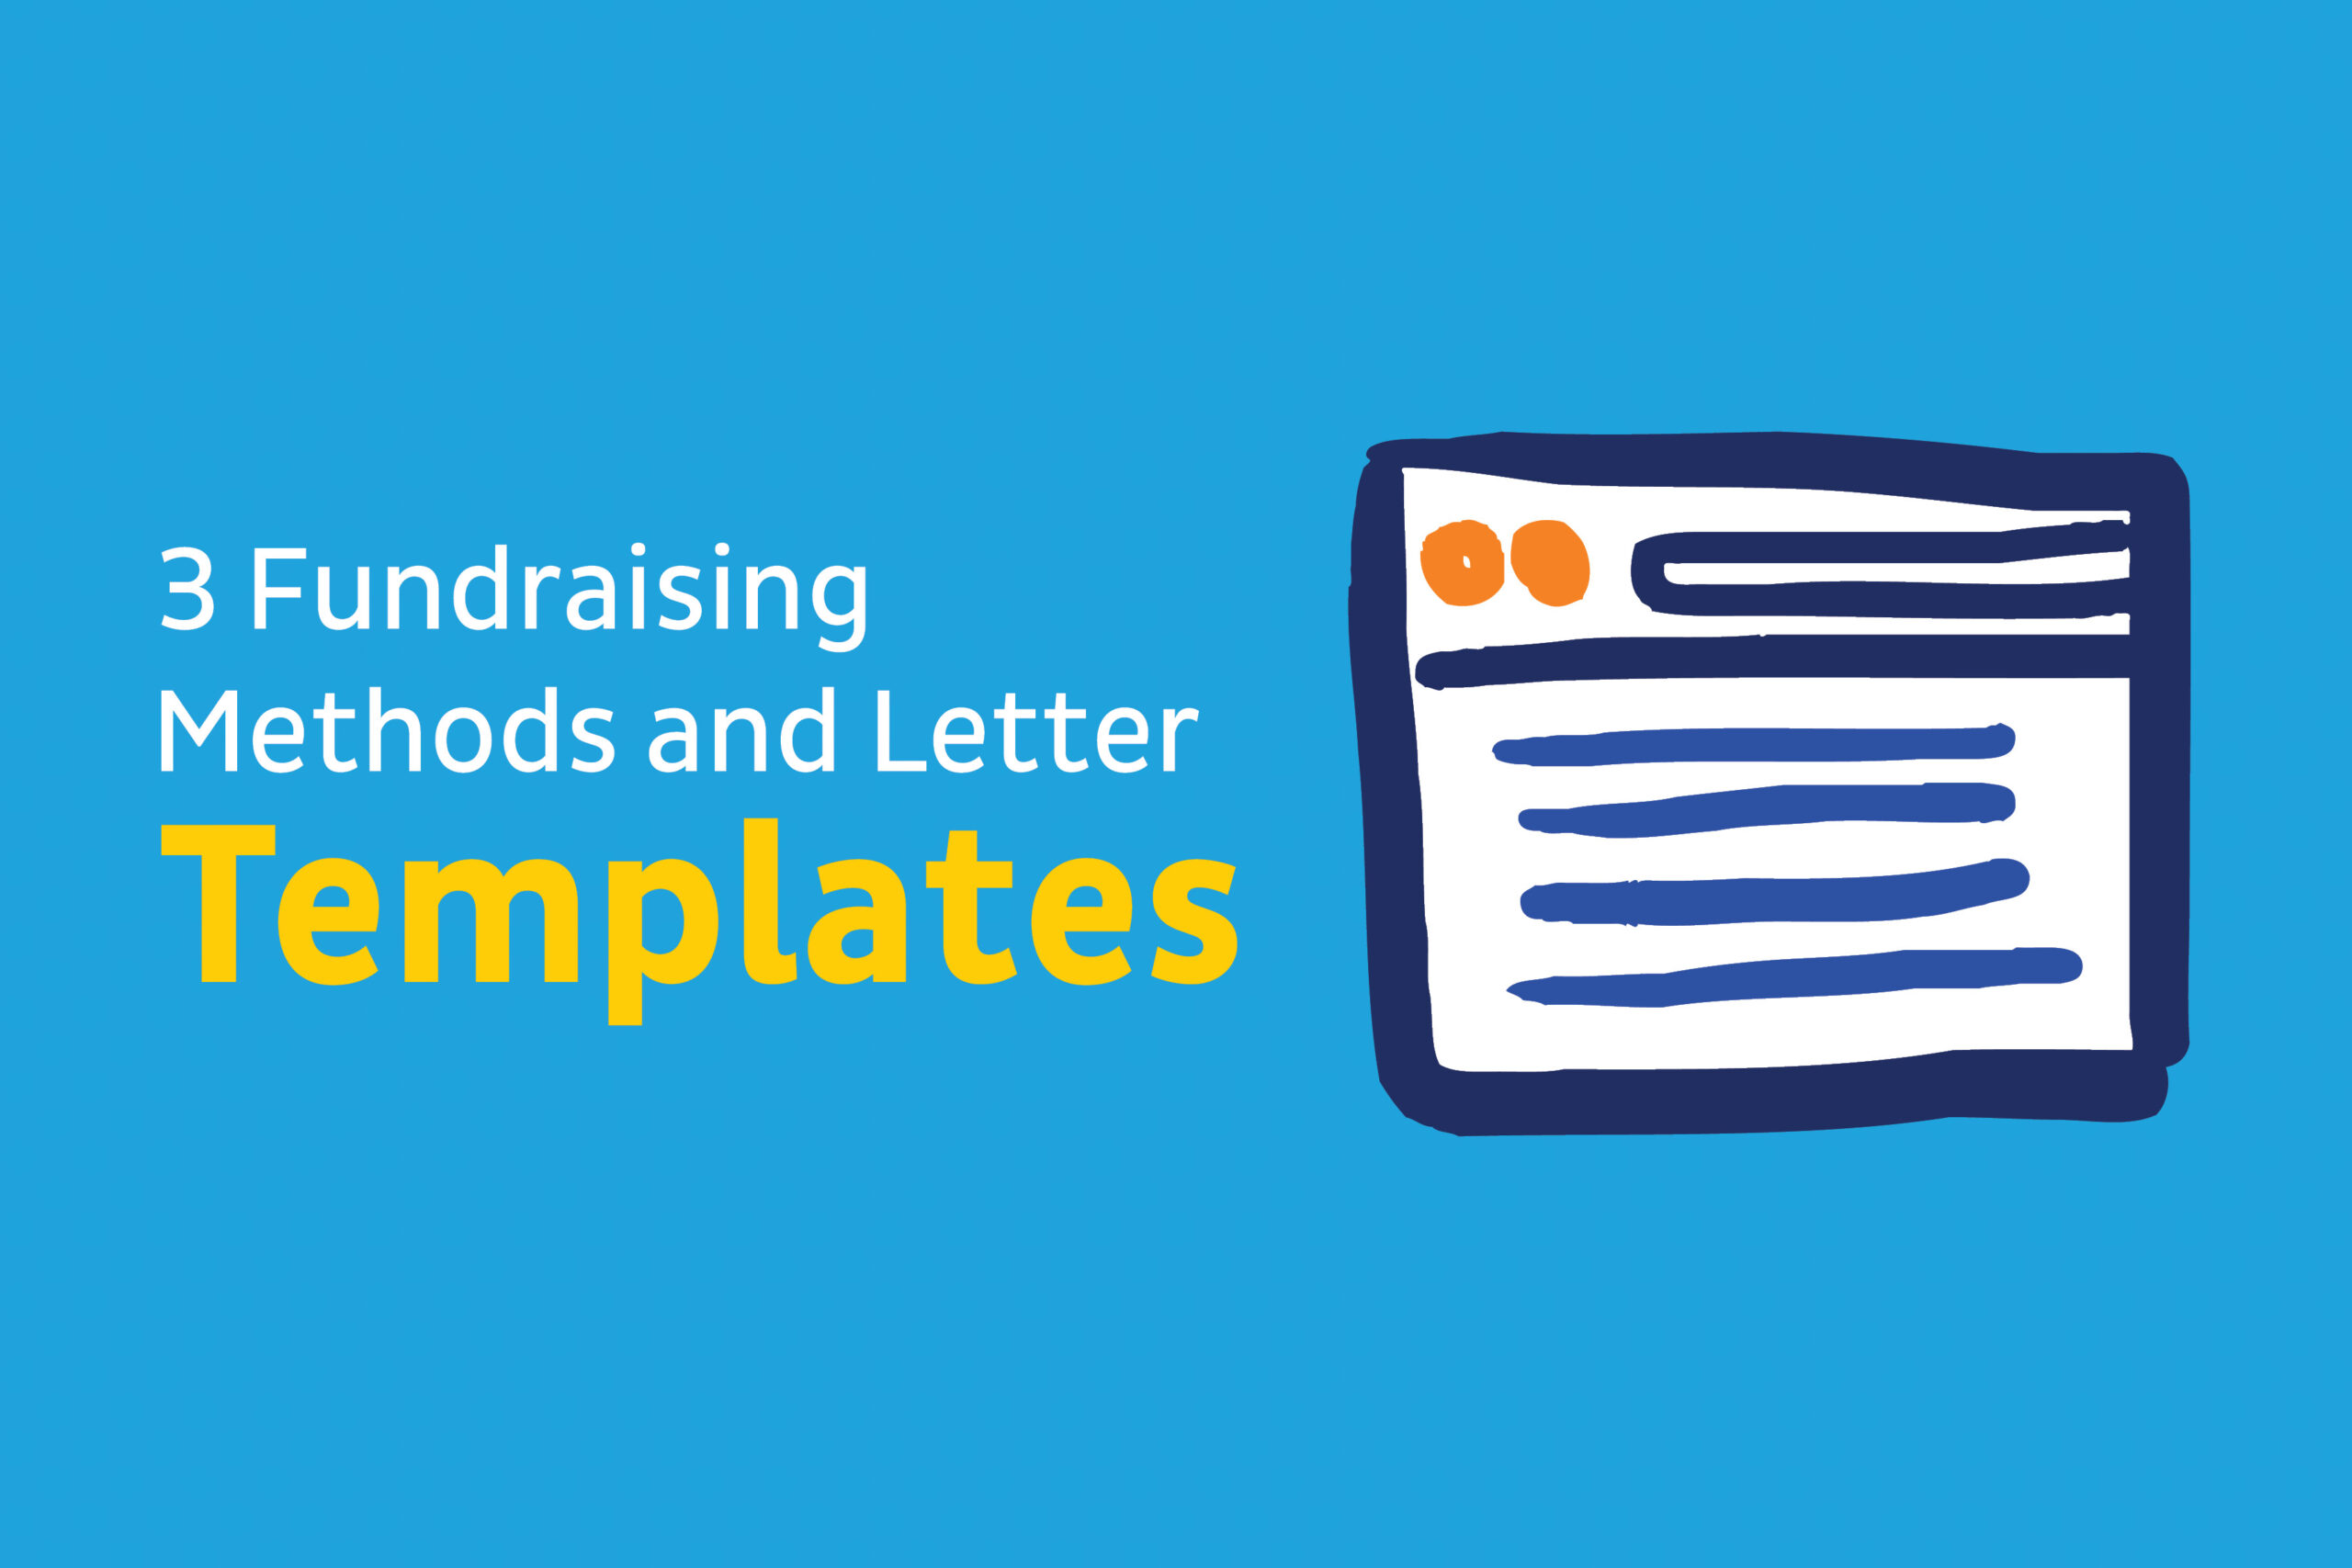 3-fundraising-methods-and-letter-templates